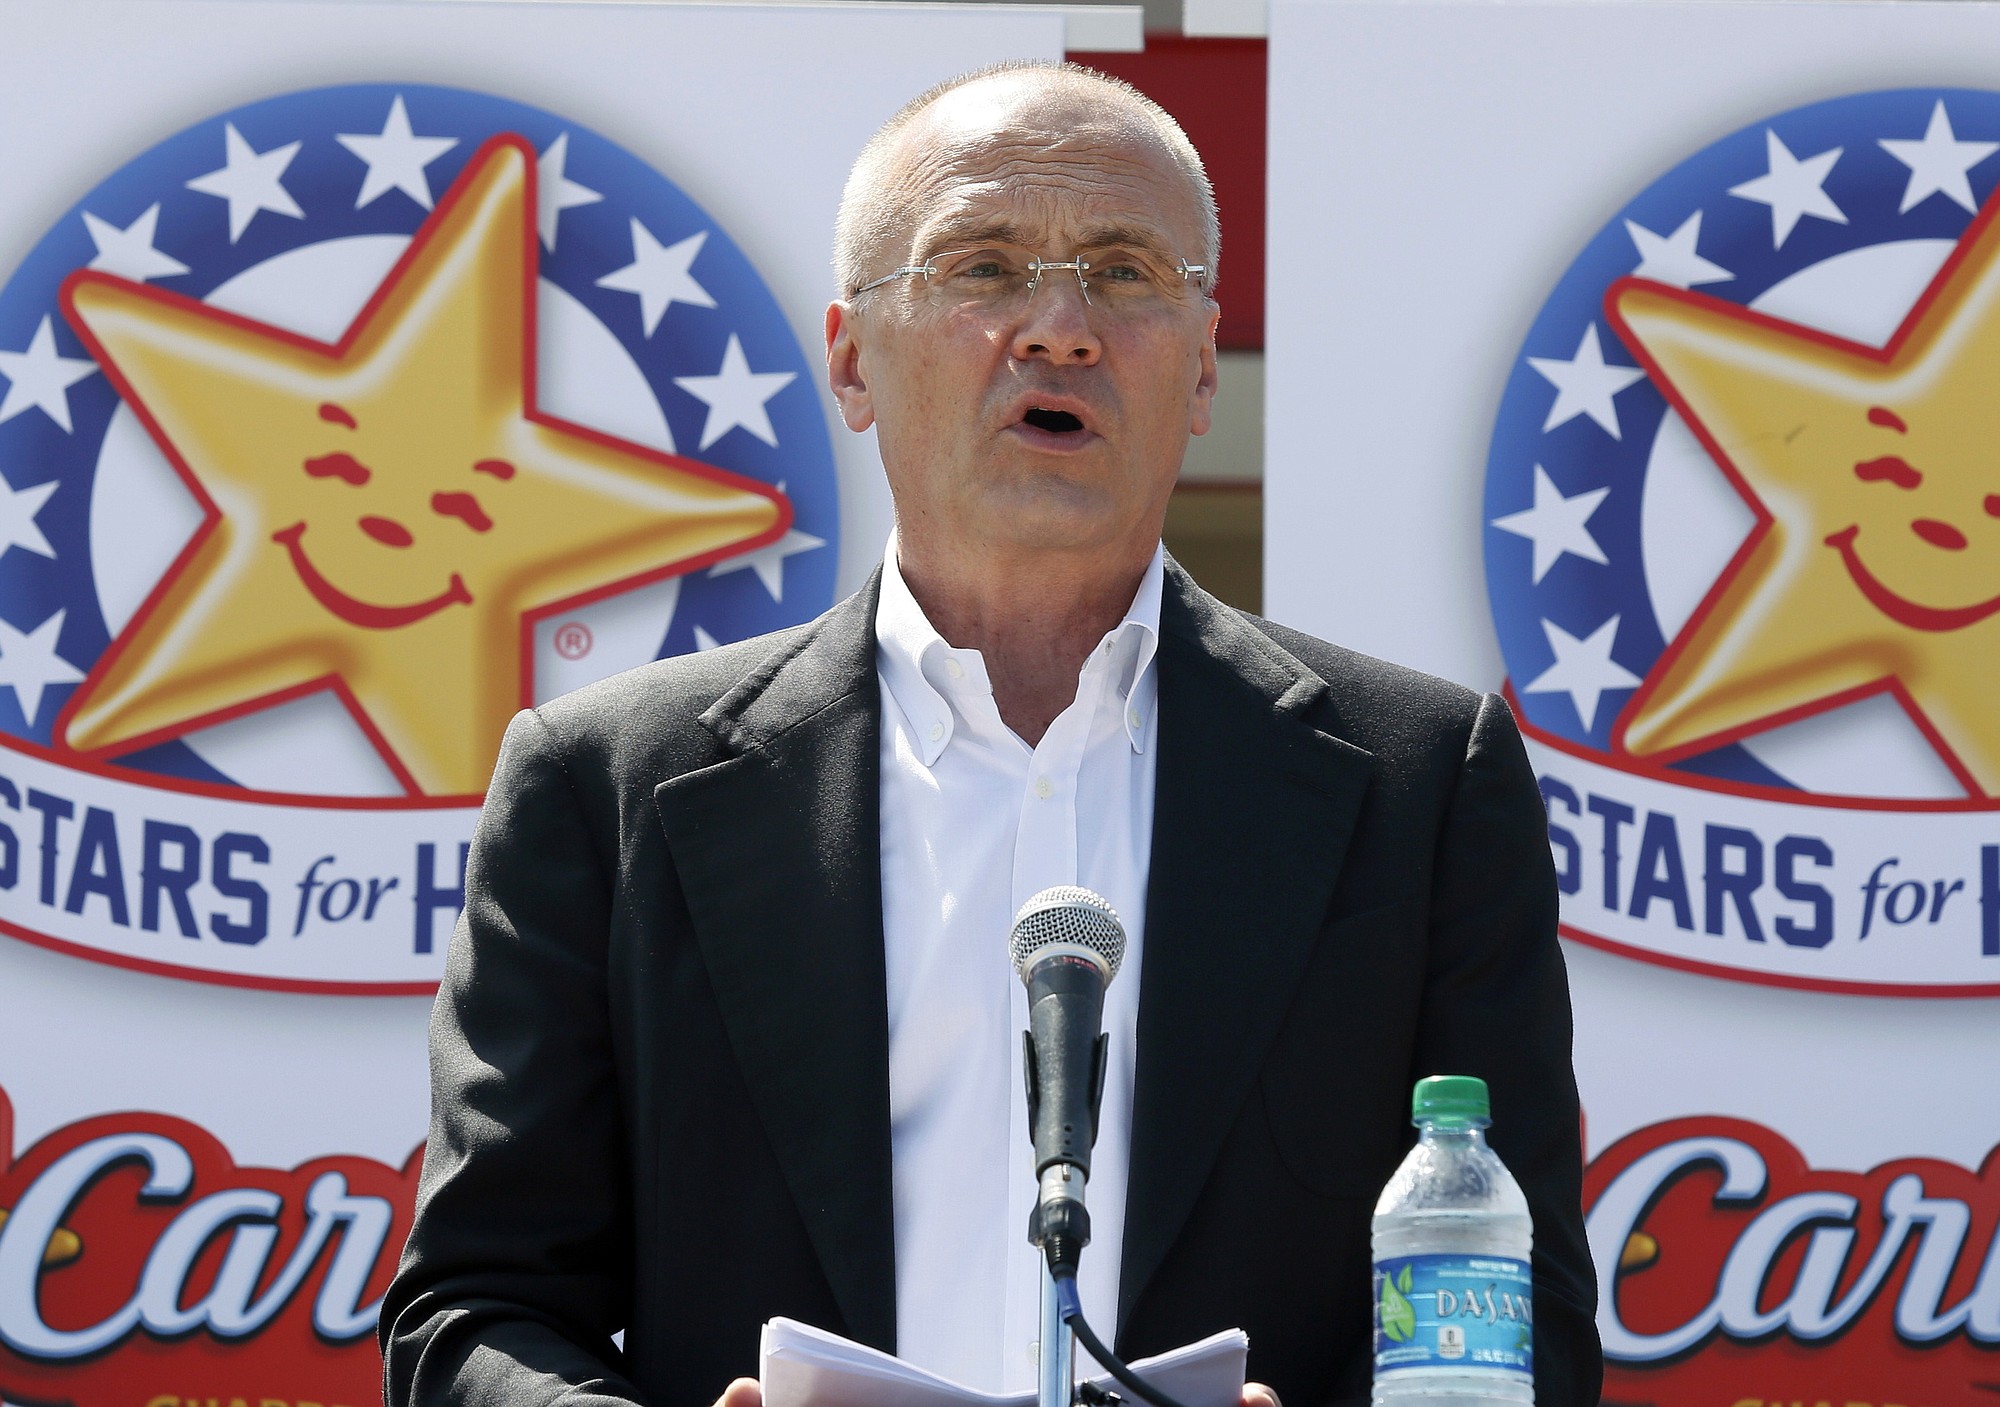 CKE Restaurants CEO Andy Puzder speaks Aug. 6 at a news conference in Austin, Texas, to highlight Carl's Jr.'s commitment to the state. Carl's Jr.